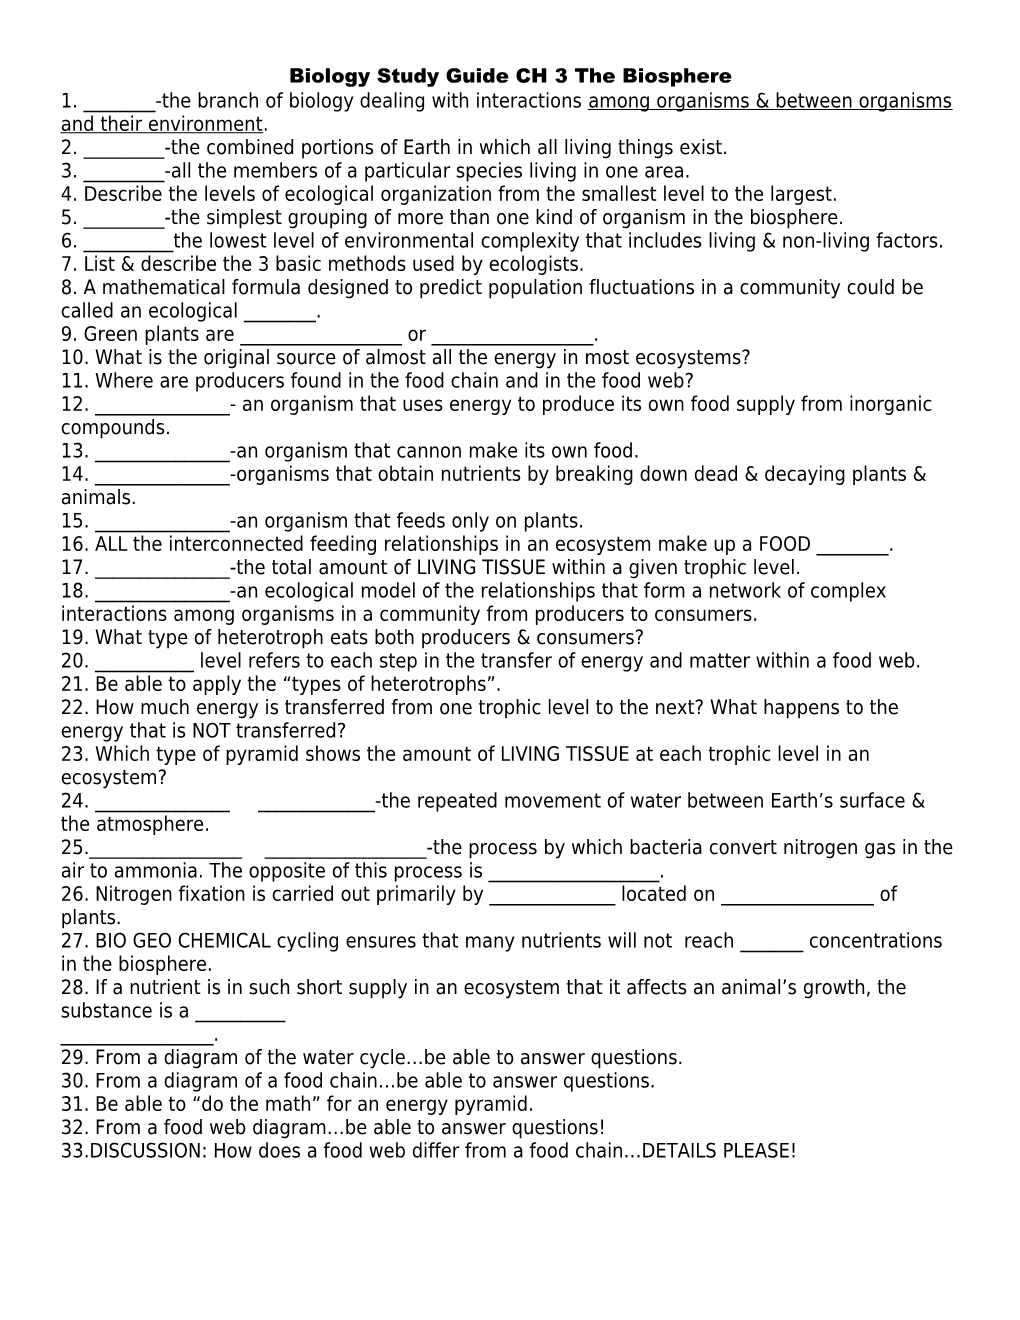 Biology Study Guide CH 3 the Biosphere